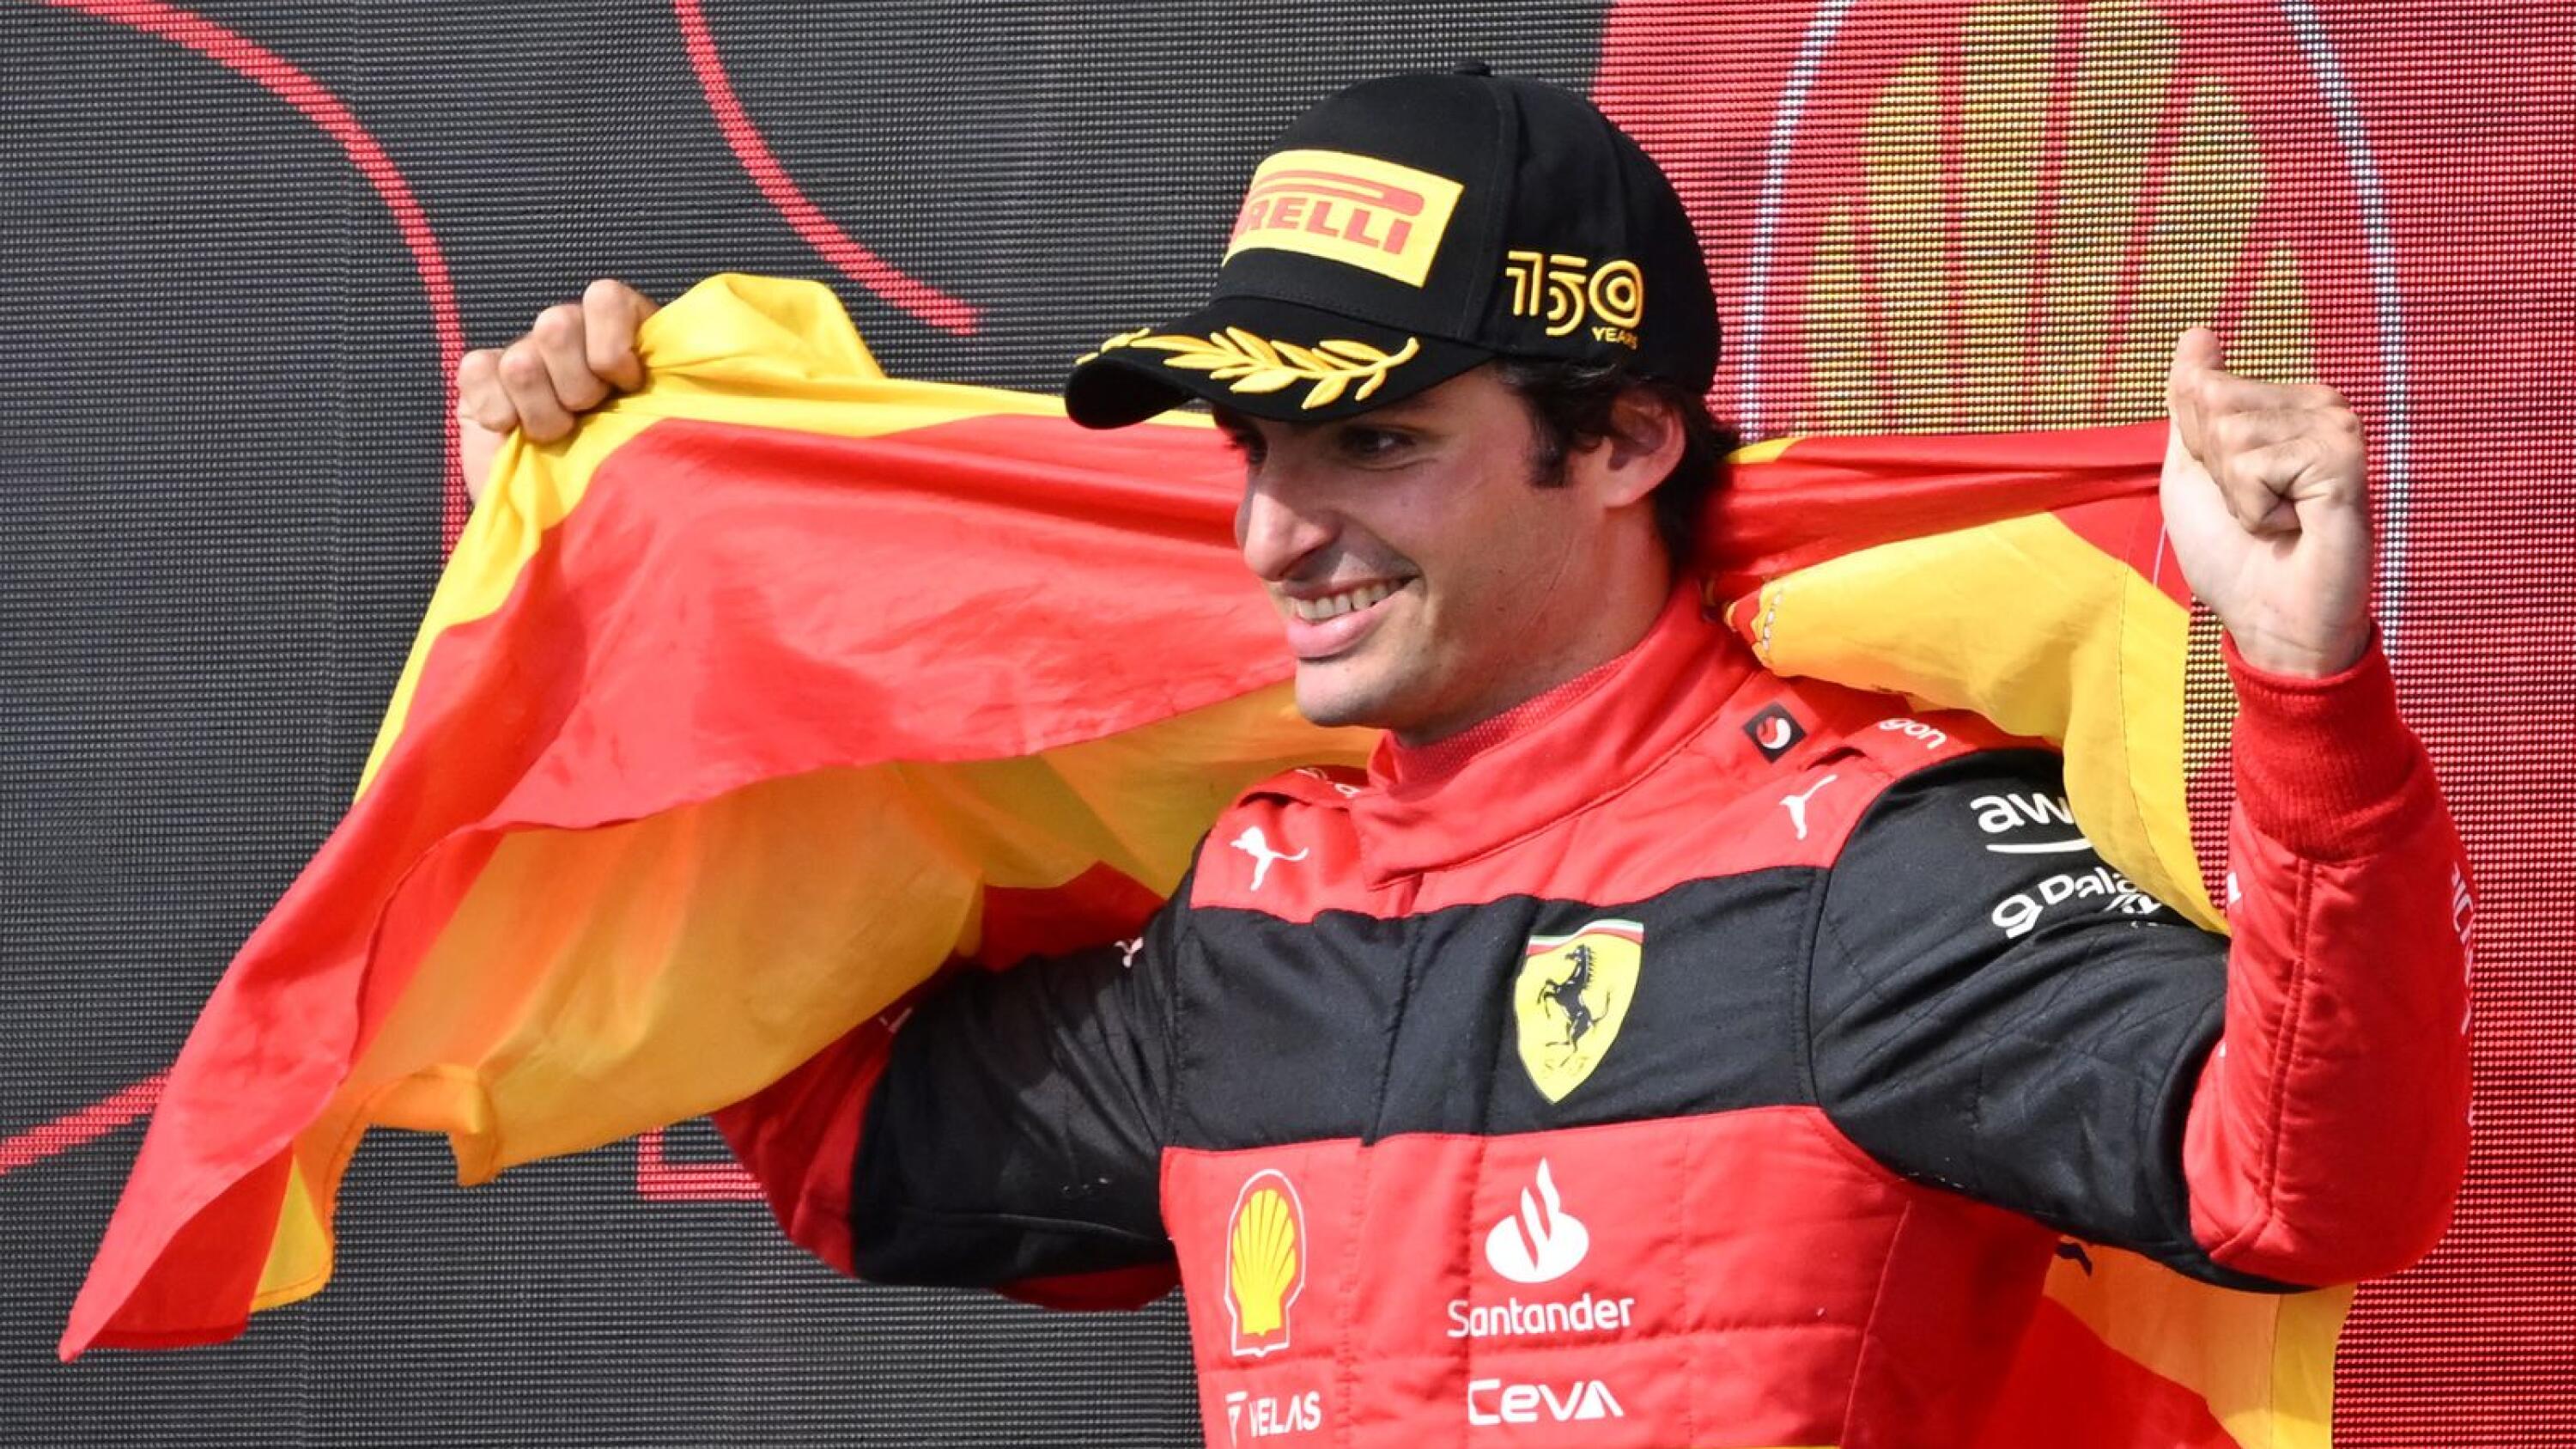 Ferrari's Spanish driver Carlos Sainz Jr celebrates after winning the Formula One British Grand Prix at the Silverstone motor racing circuit in Silverstone, central England on Saturday